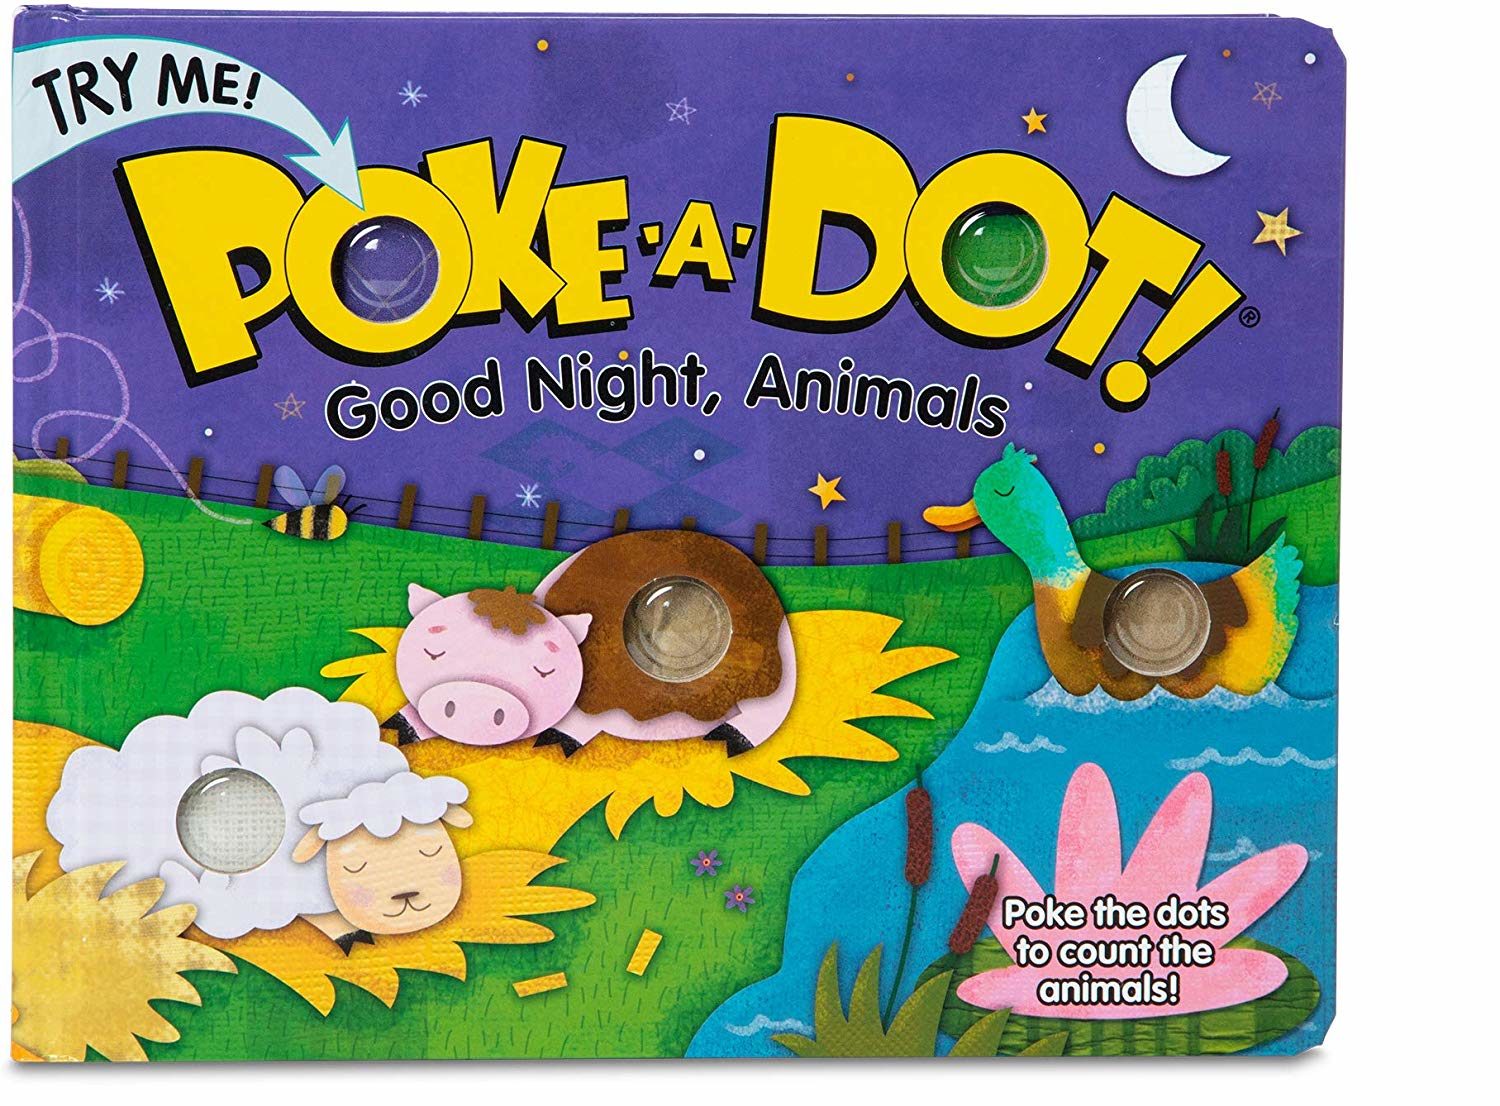 Gifts For Kids With Autism 2022: Poke a Dot book 2022